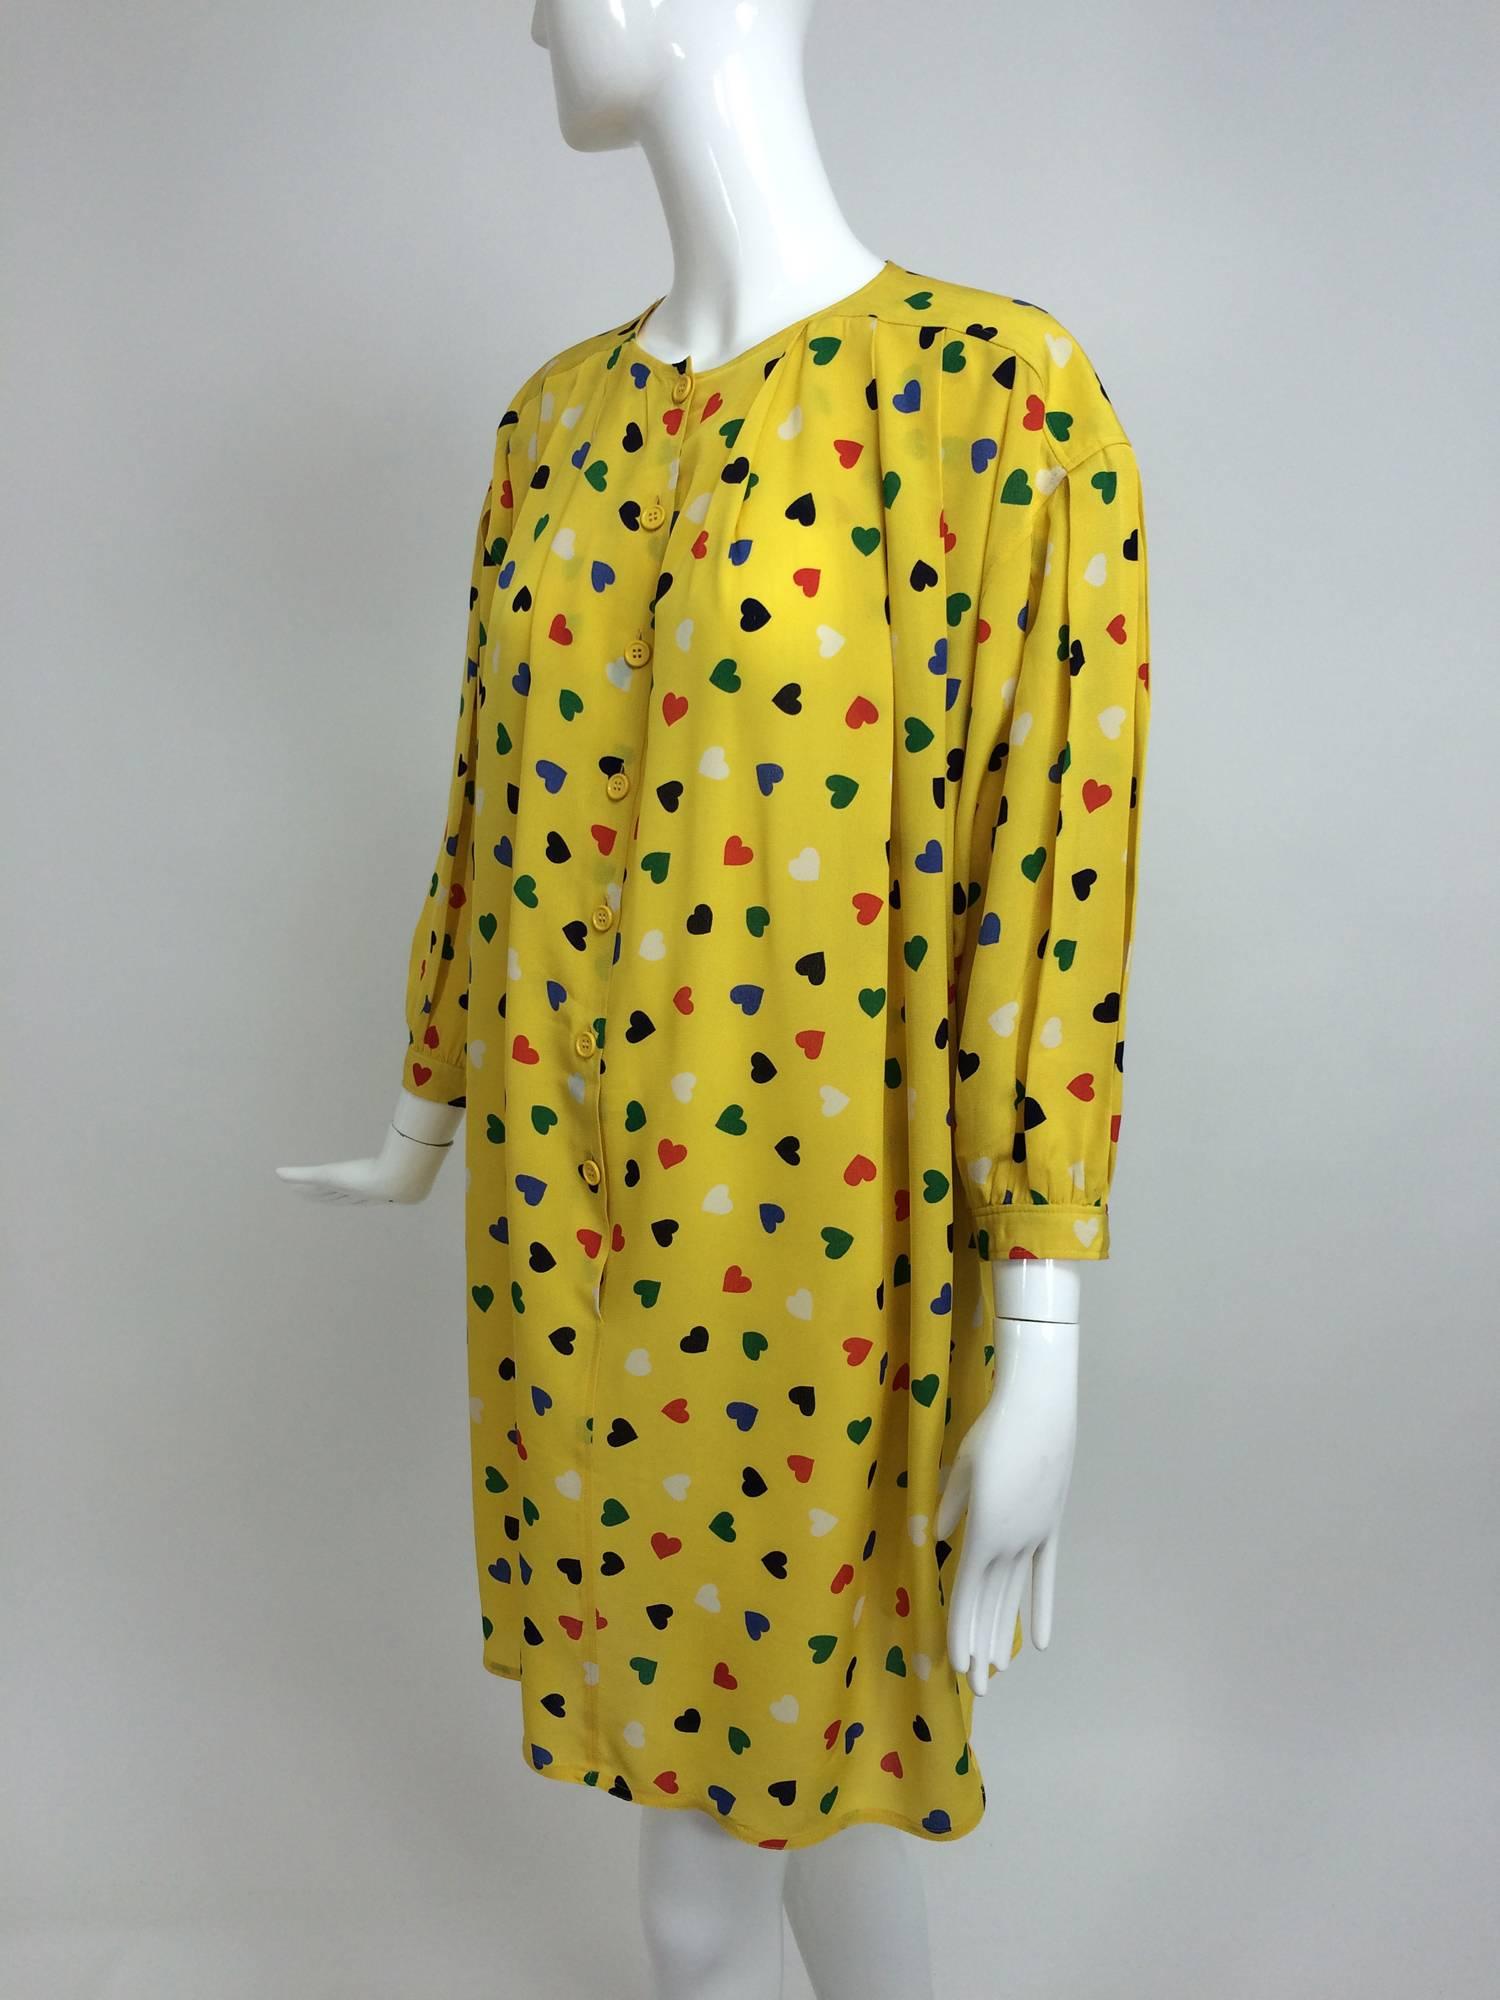 Vintage Ungaro coloured heart print yellow smock dress 1980s...Yellow rayon crepe smock dress is printed all over with hearts in red, blue, green and black...The dress has a round yoke neckline, dropped shoulder, button placket front and falls in